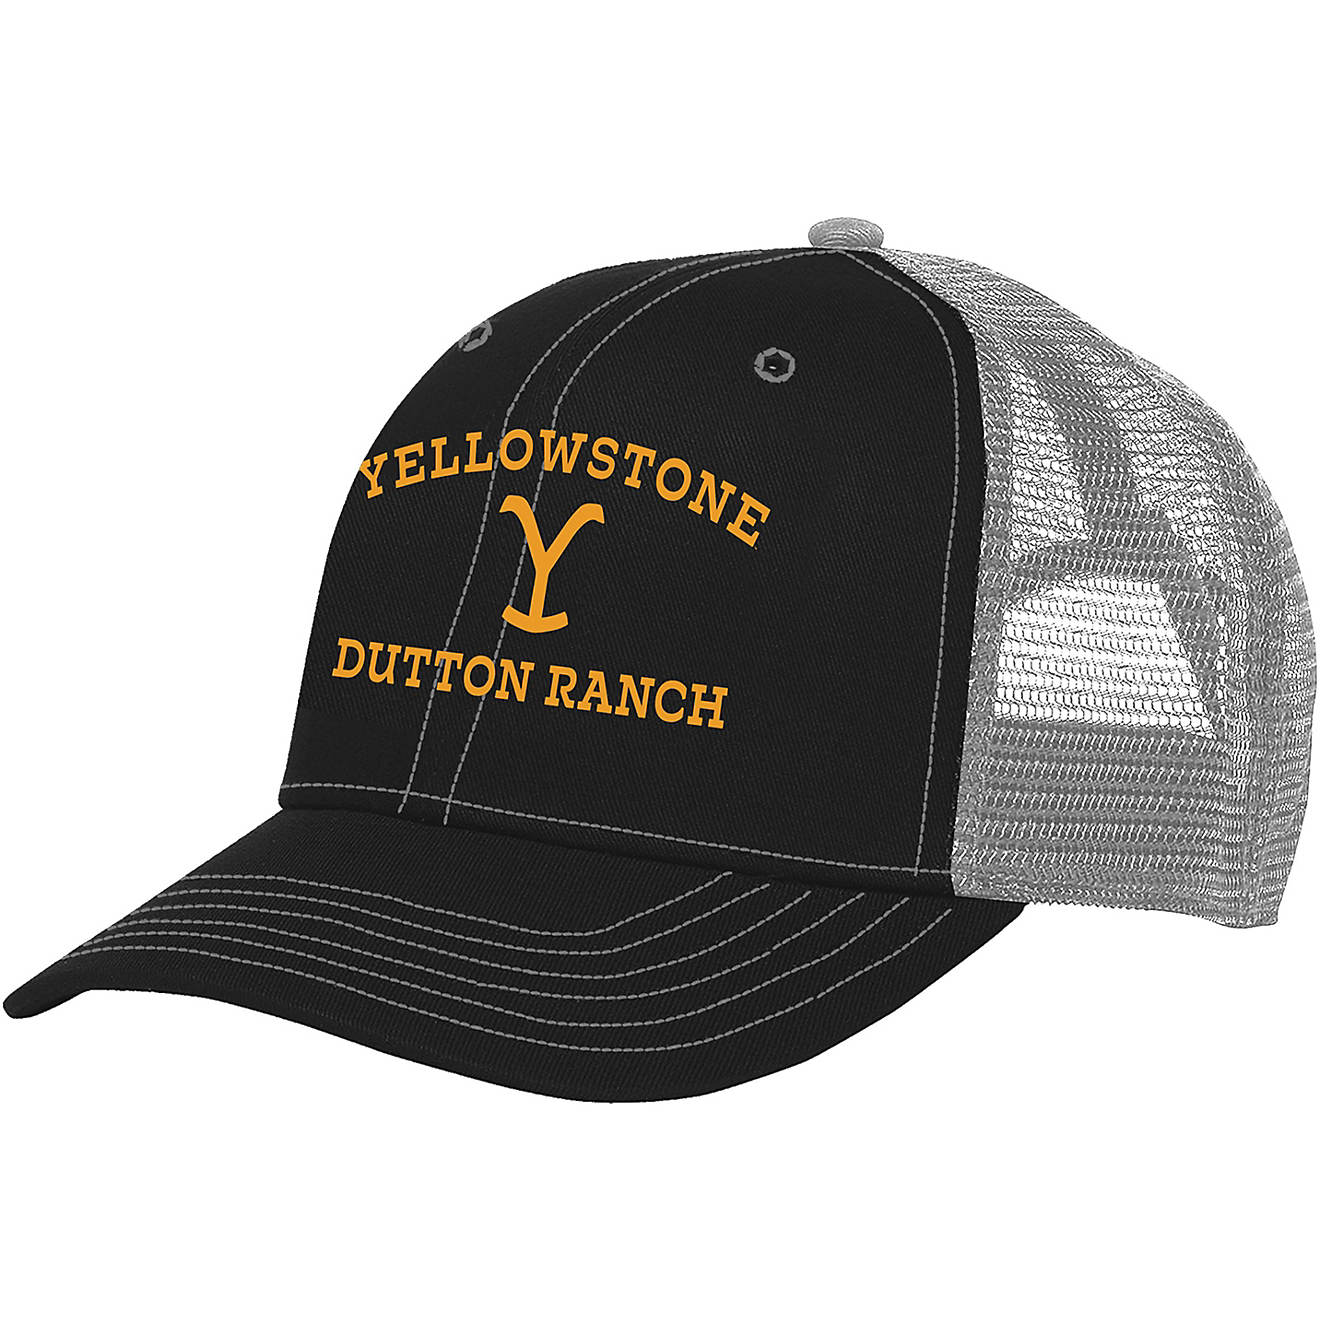 Changes Adults' Yellowstone Dutton Ranch Trucker Hat                                                                             - view number 1